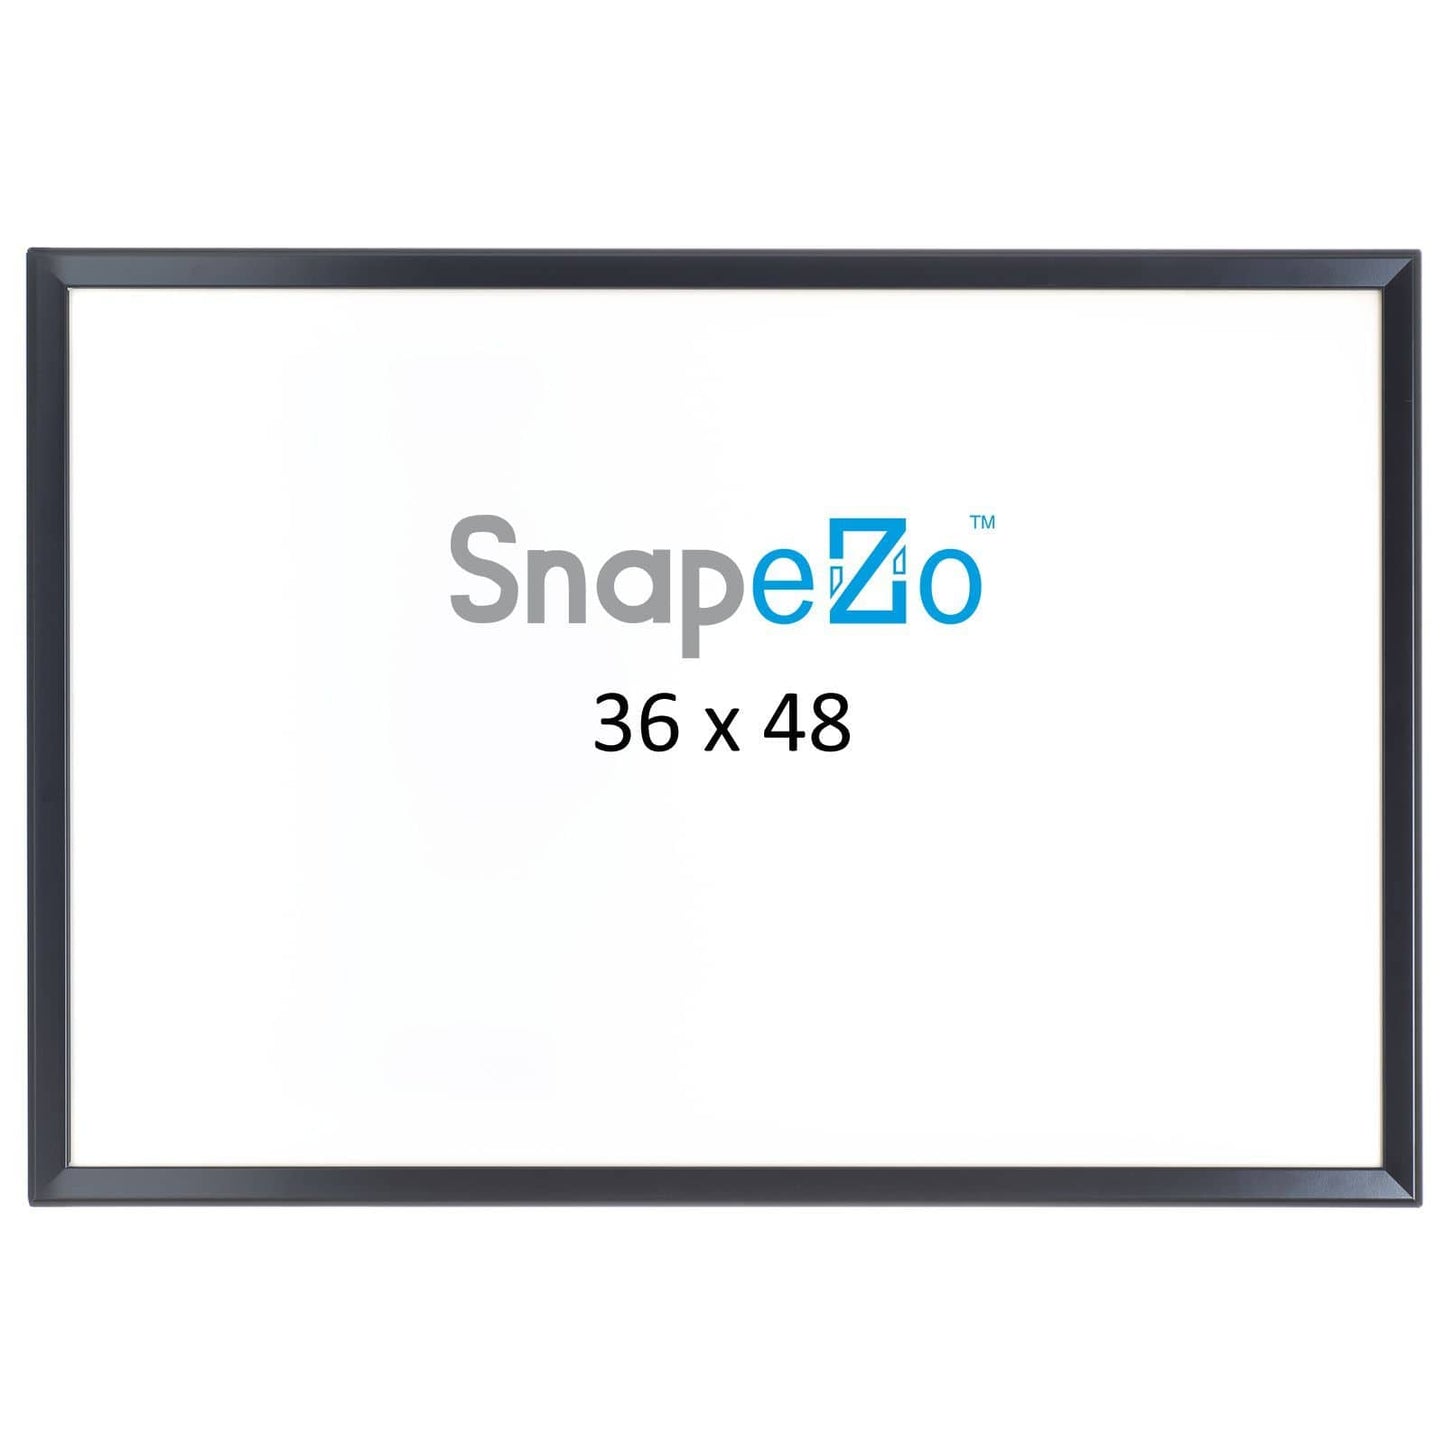 Black snap frame poster size 36x48 - 1.25 inch profile - Self-assembly - Snap Frames Direct